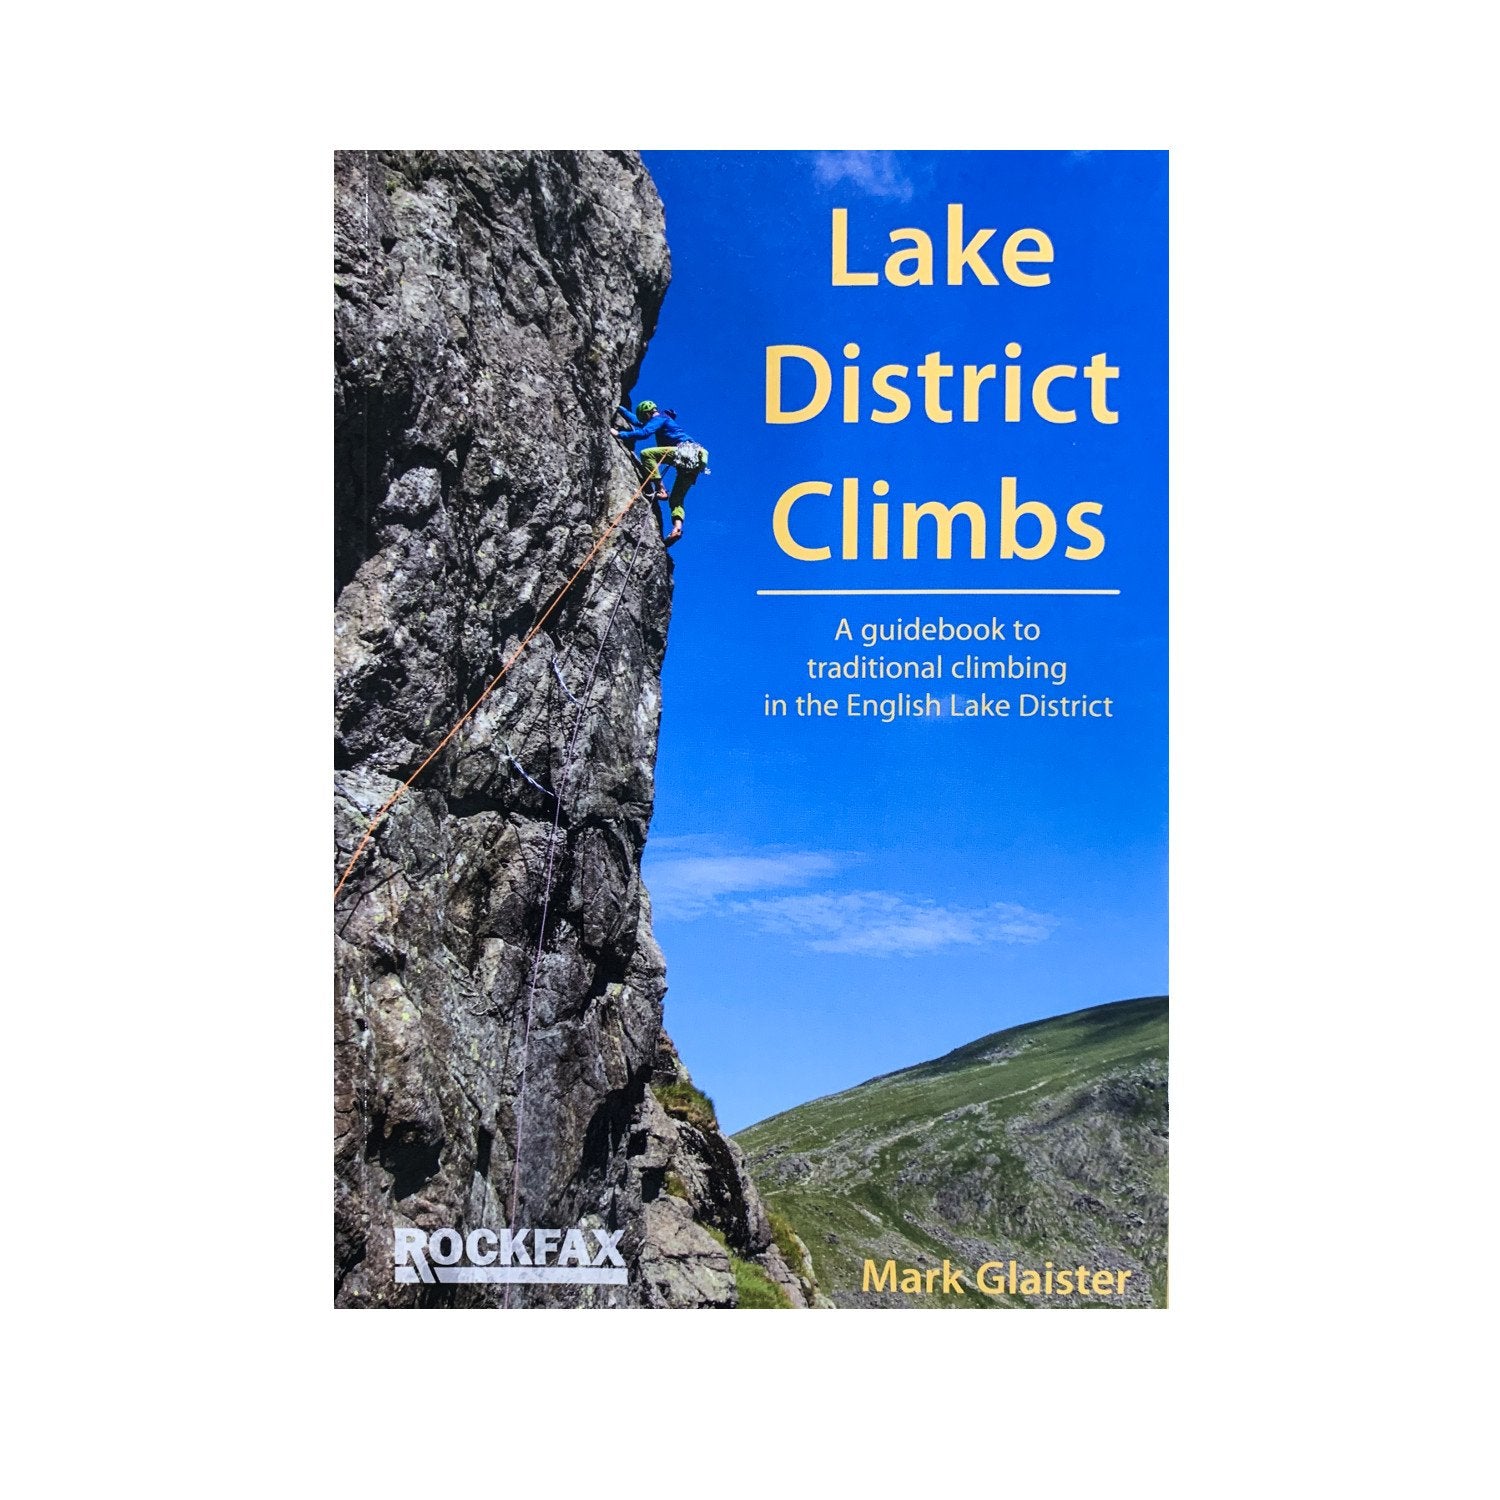 Lake District Climbs (RockFax) Front cover